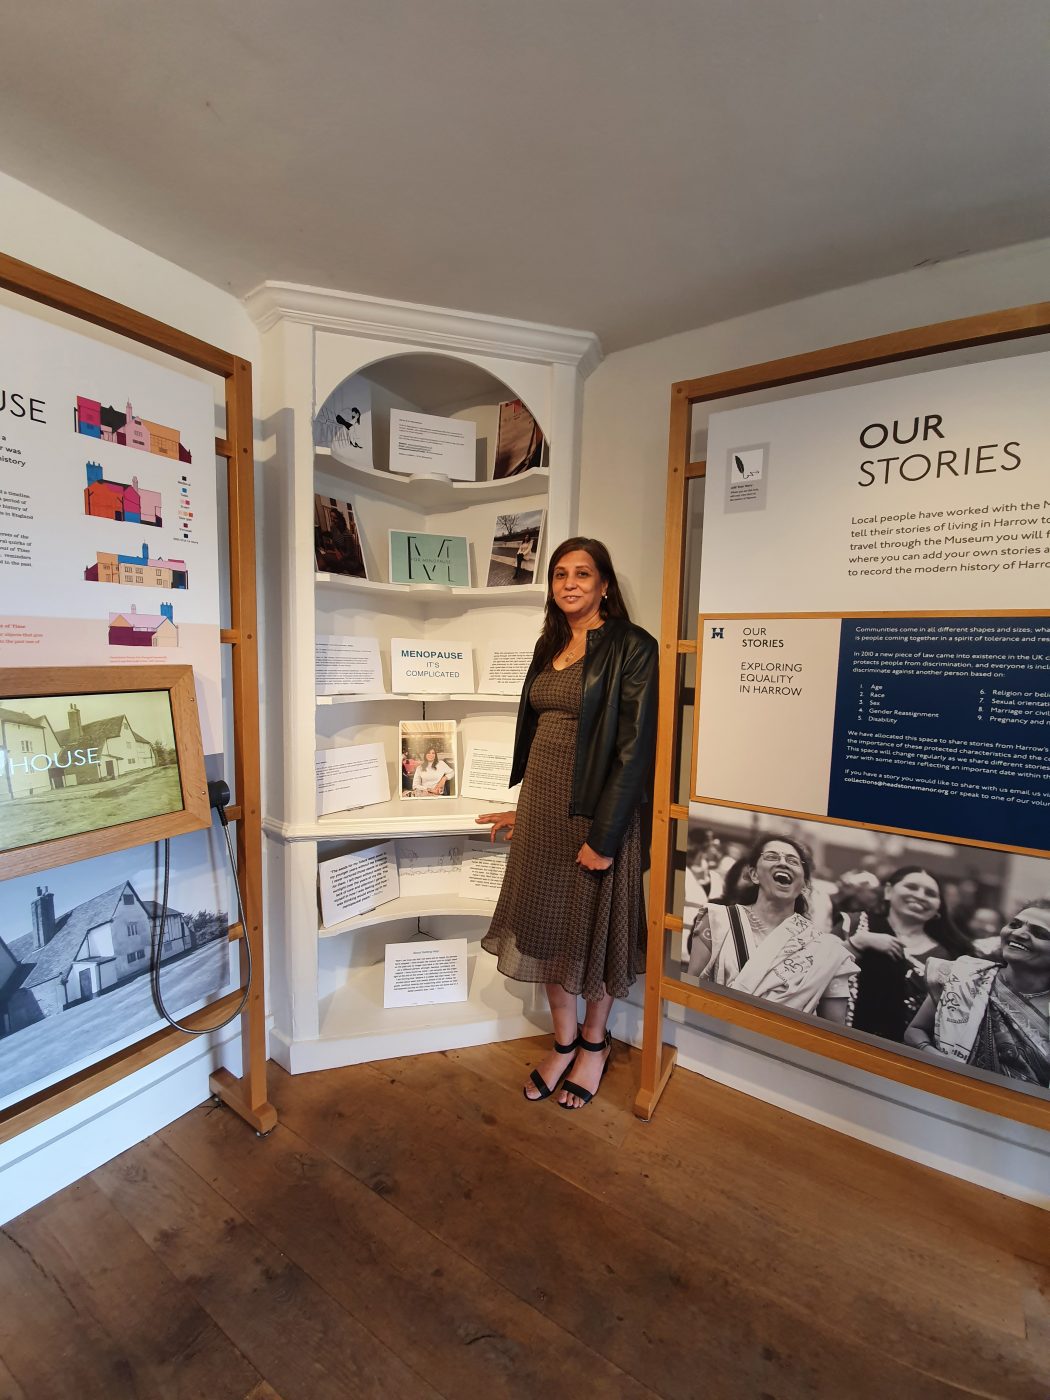 This image shows Madhu from M for Menopause standing next to the exhibition she curated. This was installed for Menopause Awareness Month and is in our community cupboard space.